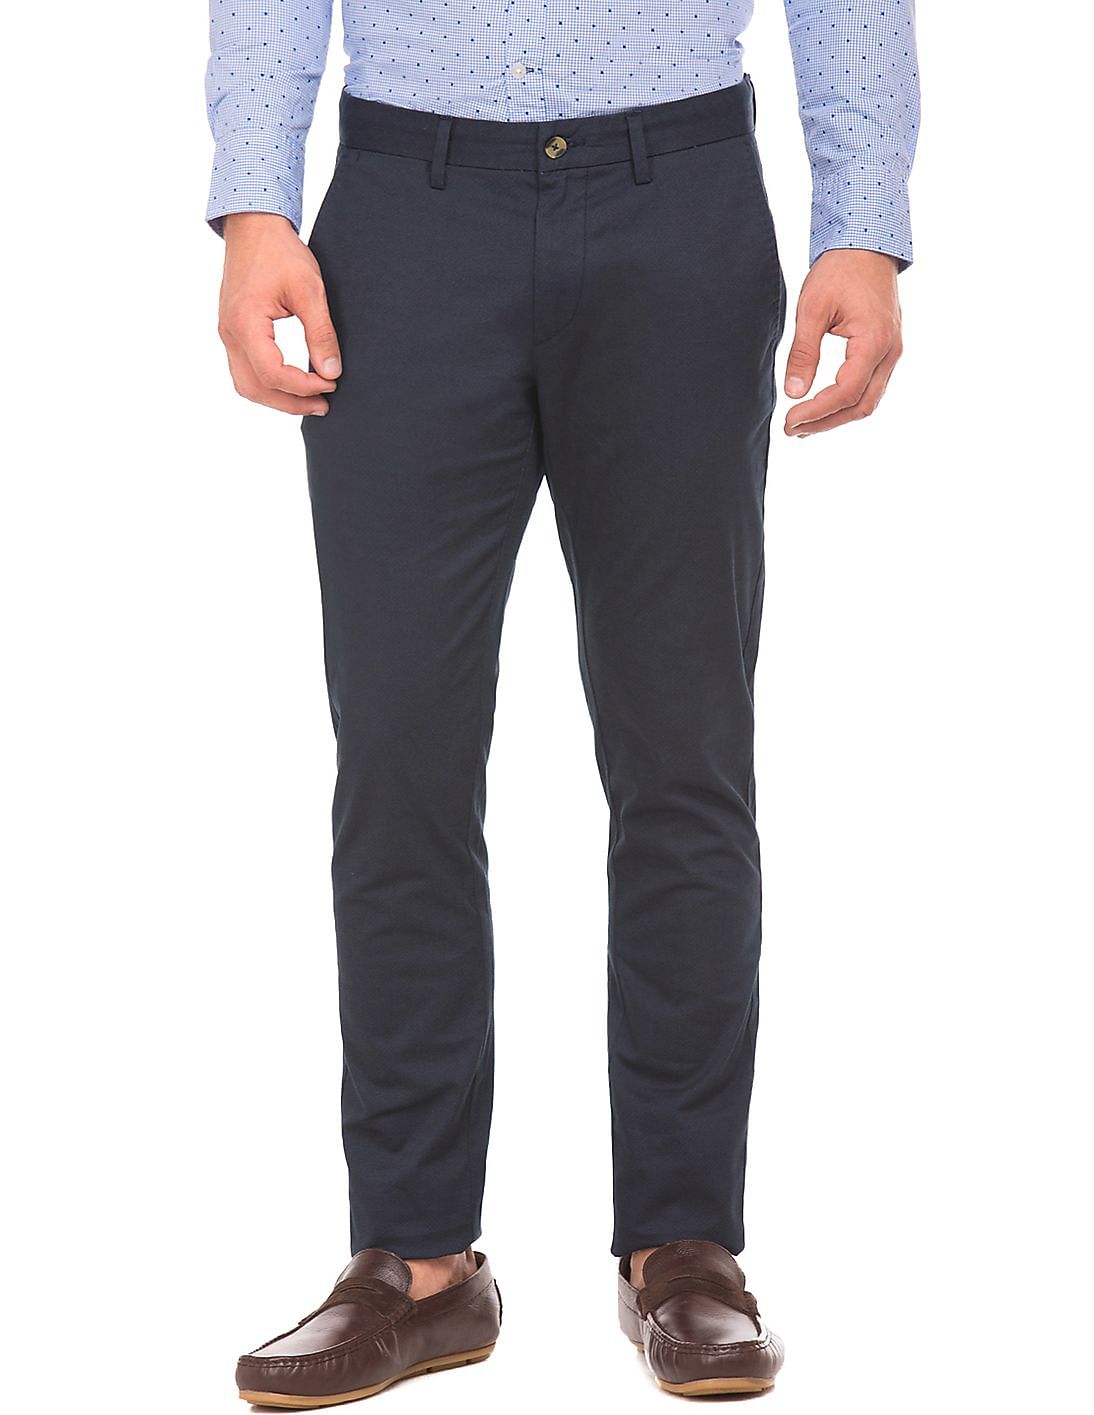 Buy U.S. Polo Assn. Men Slim Tapered Fit Flat Front Chinos - NNNOW.com